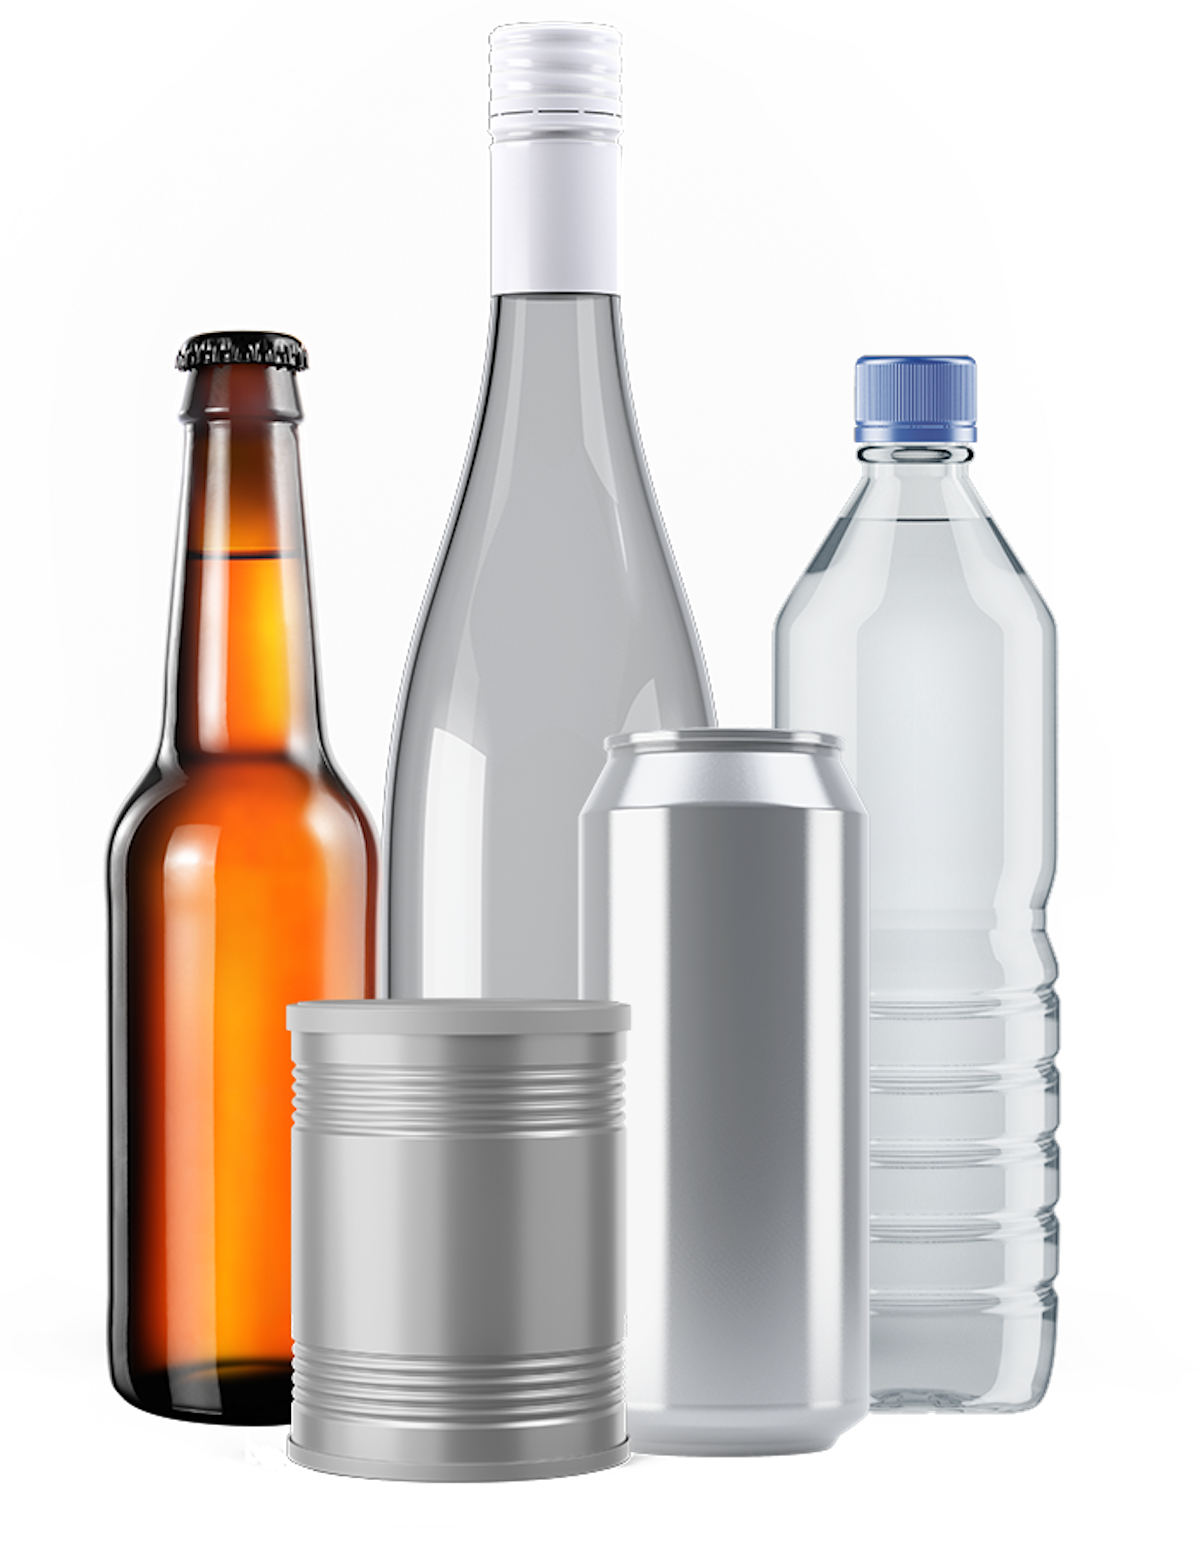 Group of beverage bottles and cans